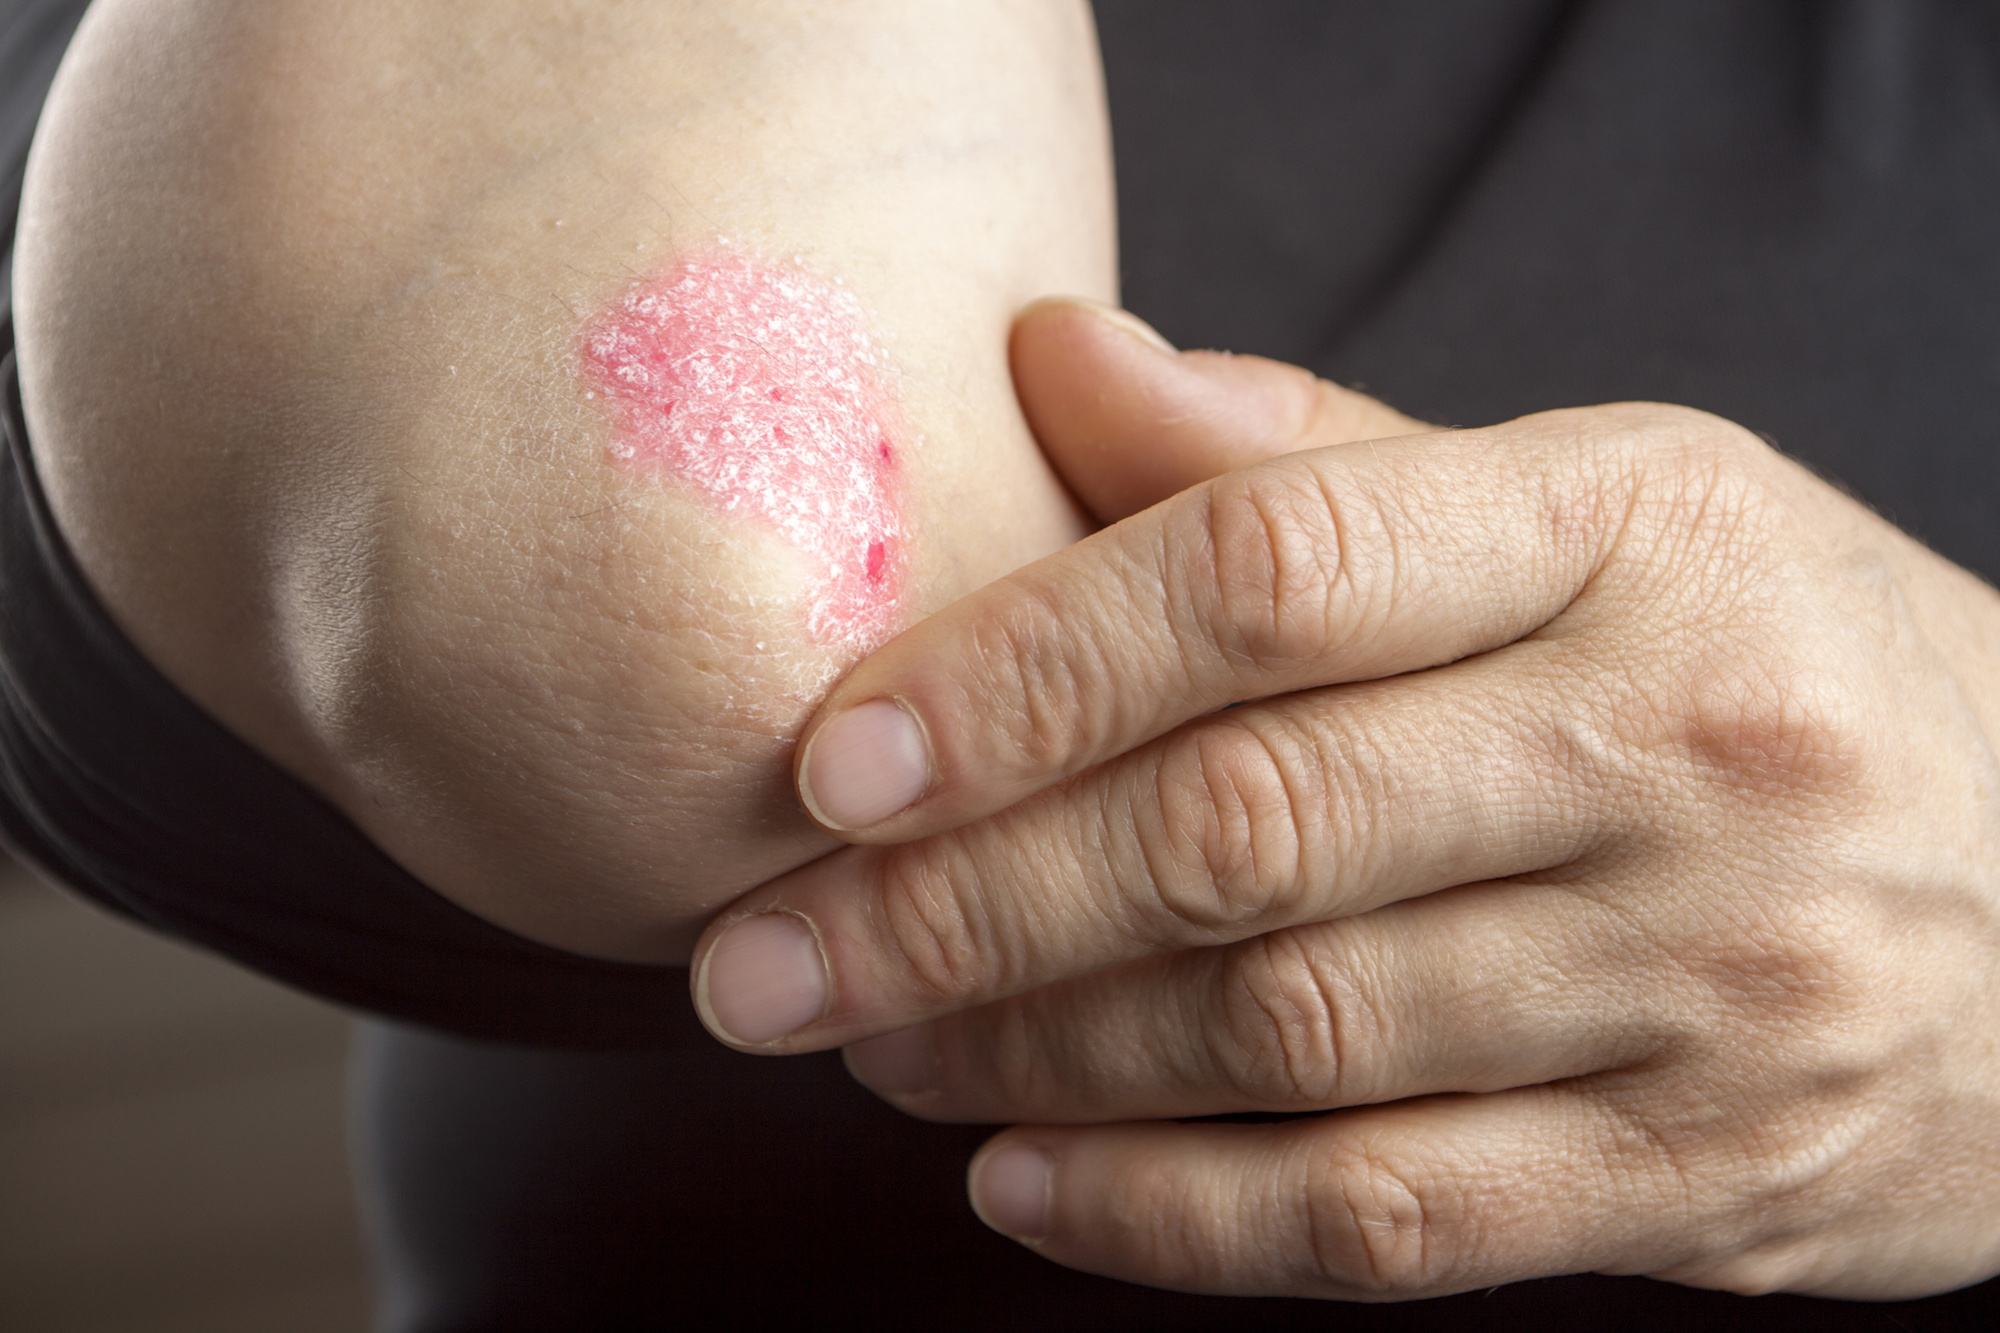 Eczema vs. Squamous Cell Carcinoma: How Can You Tell The Difference?